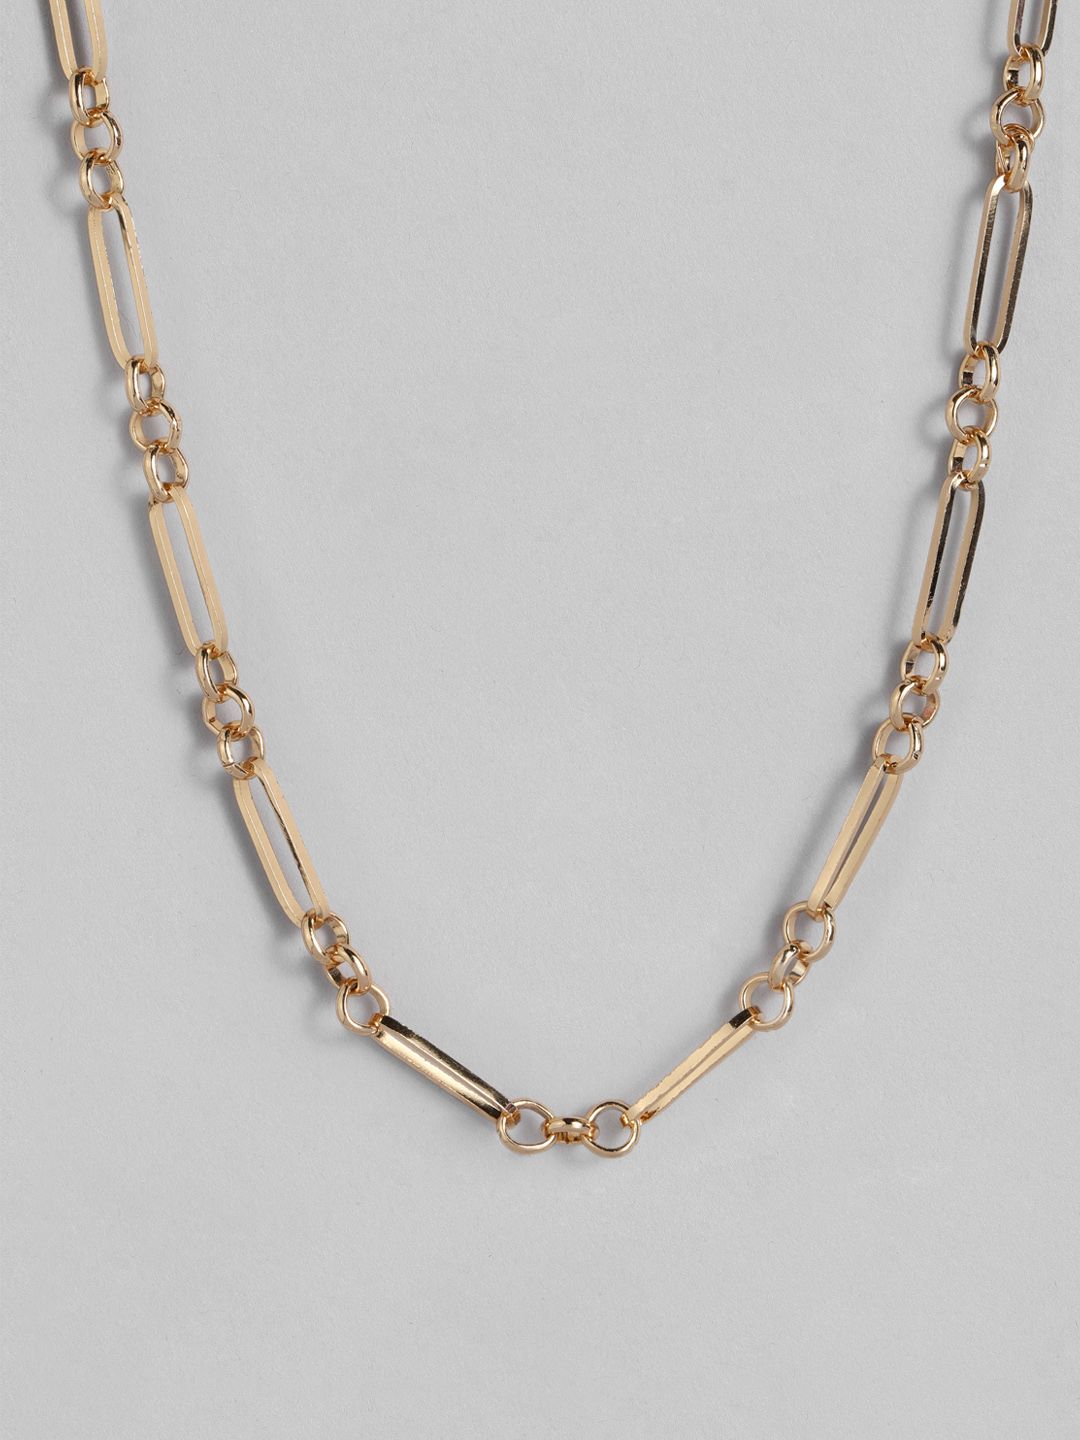 DressBerry Gold-Toned Link Chain Handcrafted Necklace Price in India